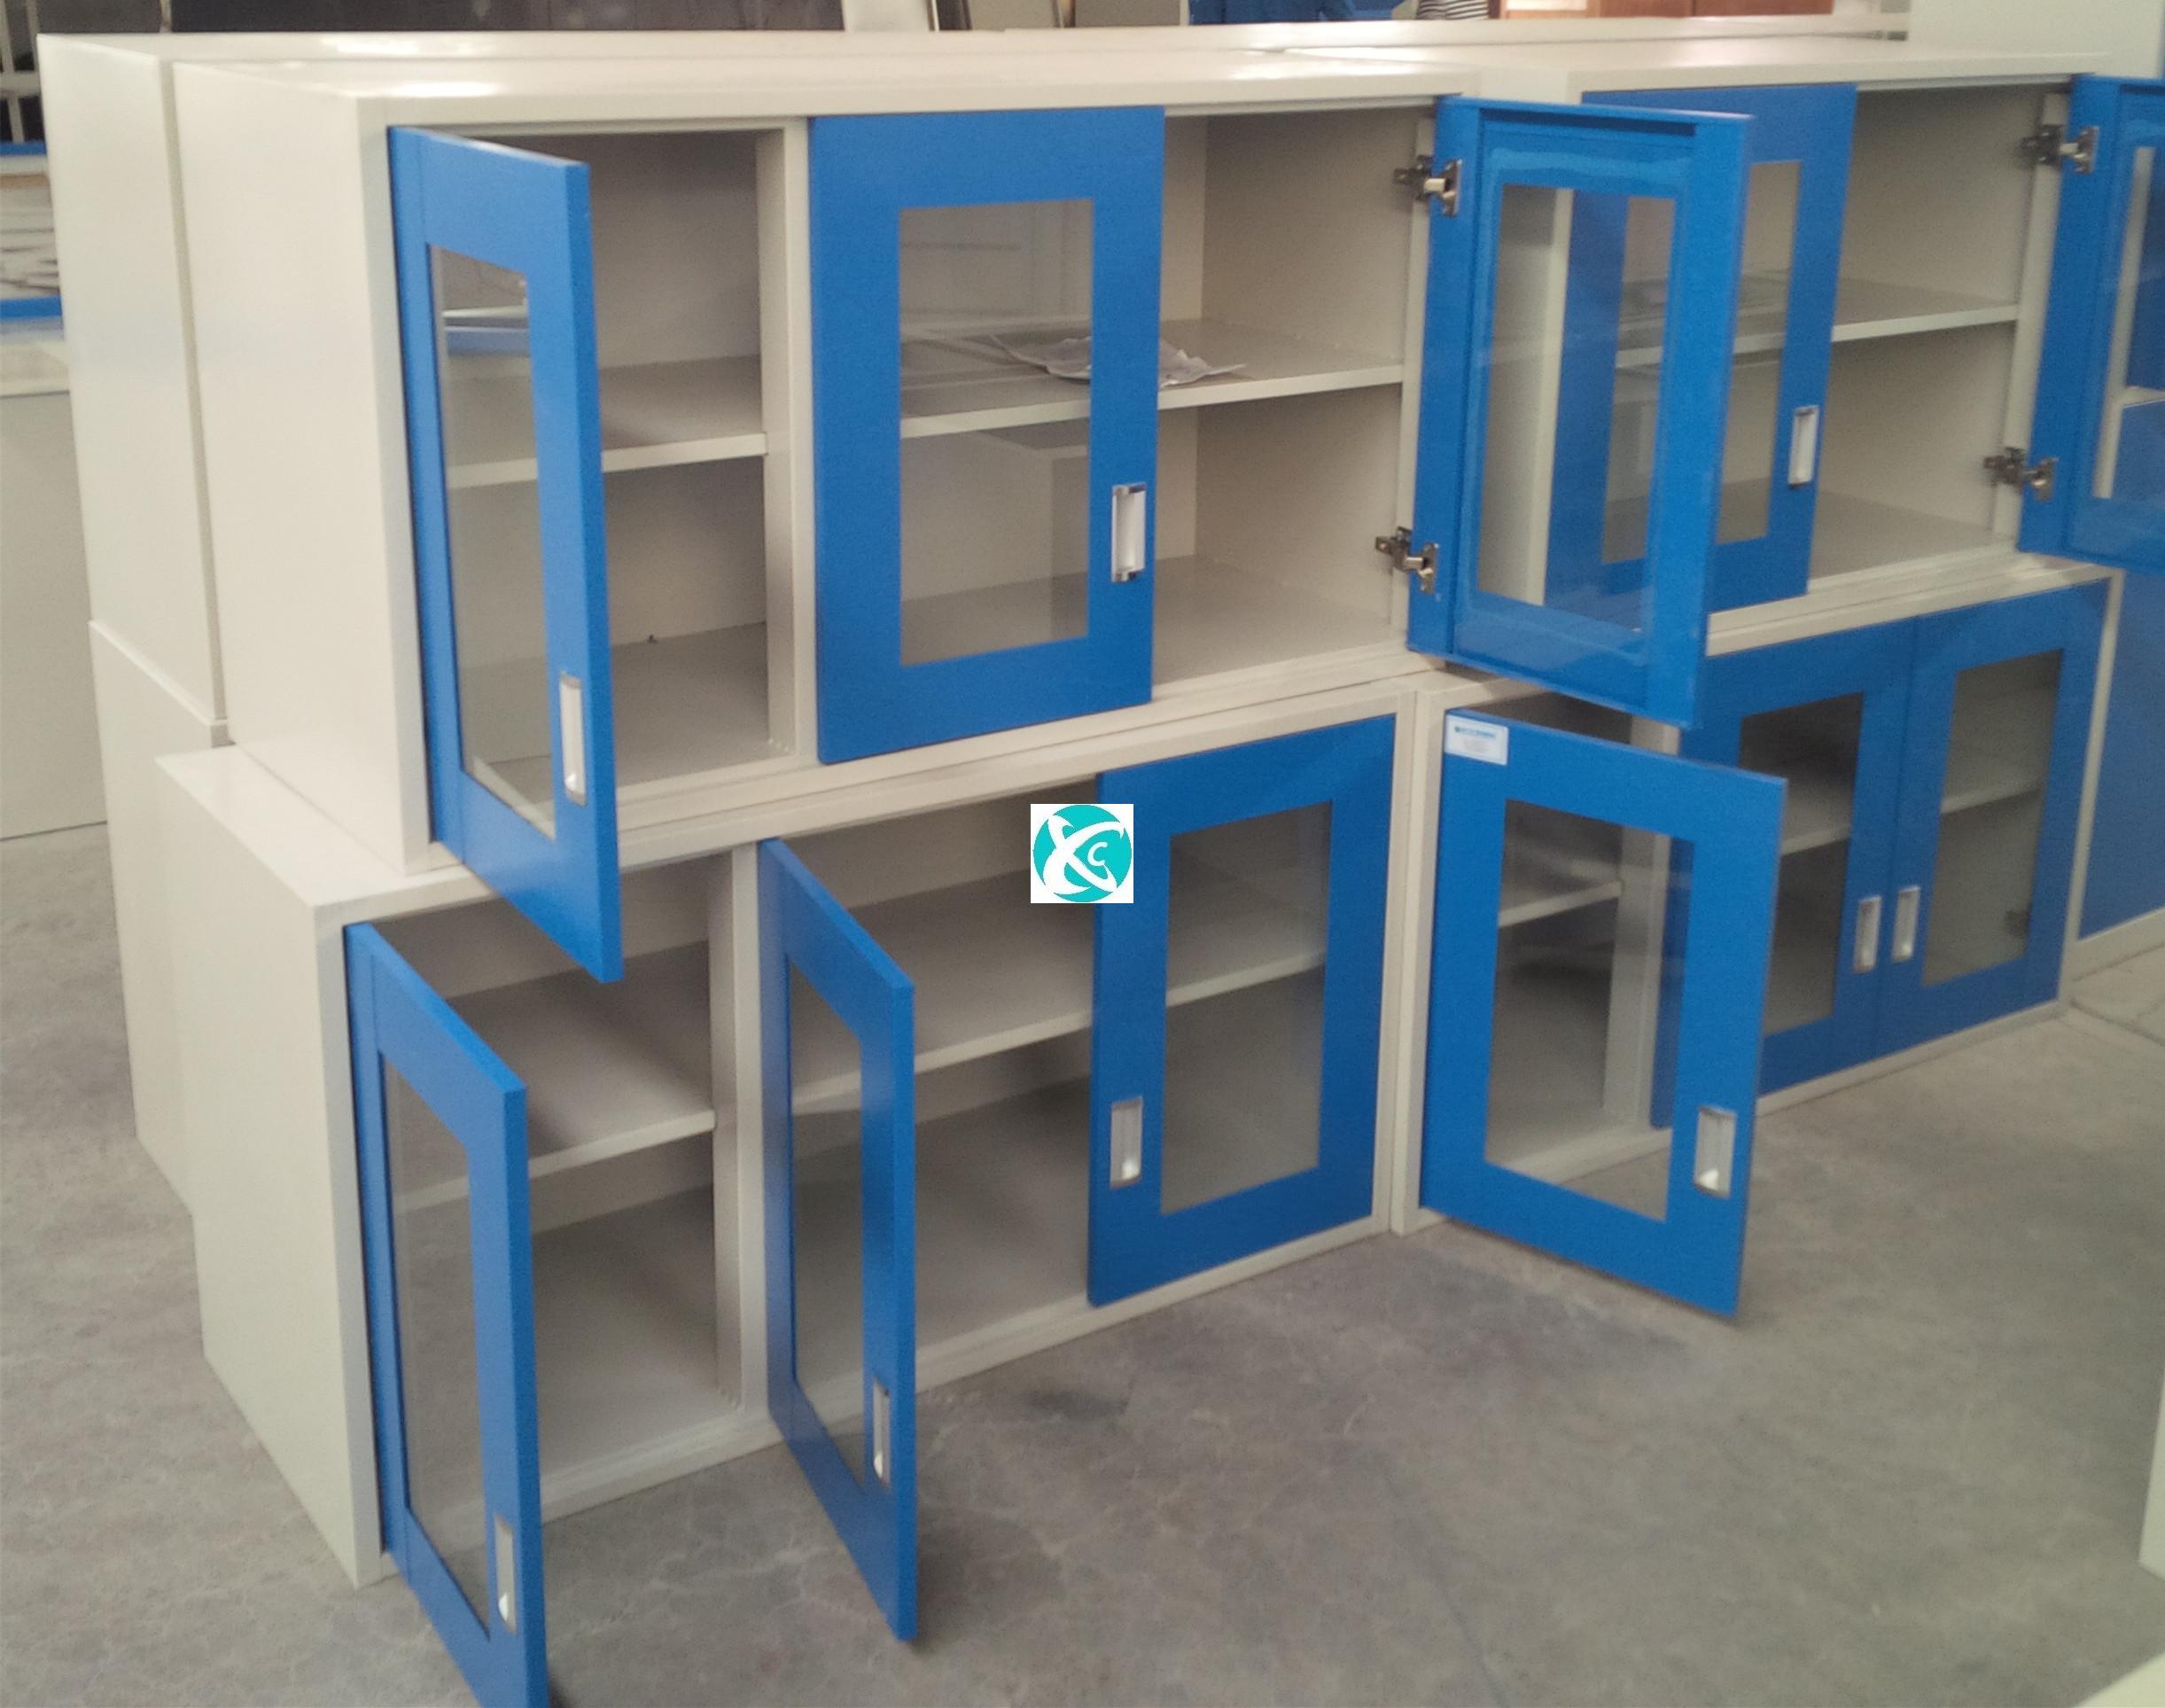 Hanging Cabinet All Steel Wall Mounted Cupboard  for Lab School Hospital Institute Office Home Use